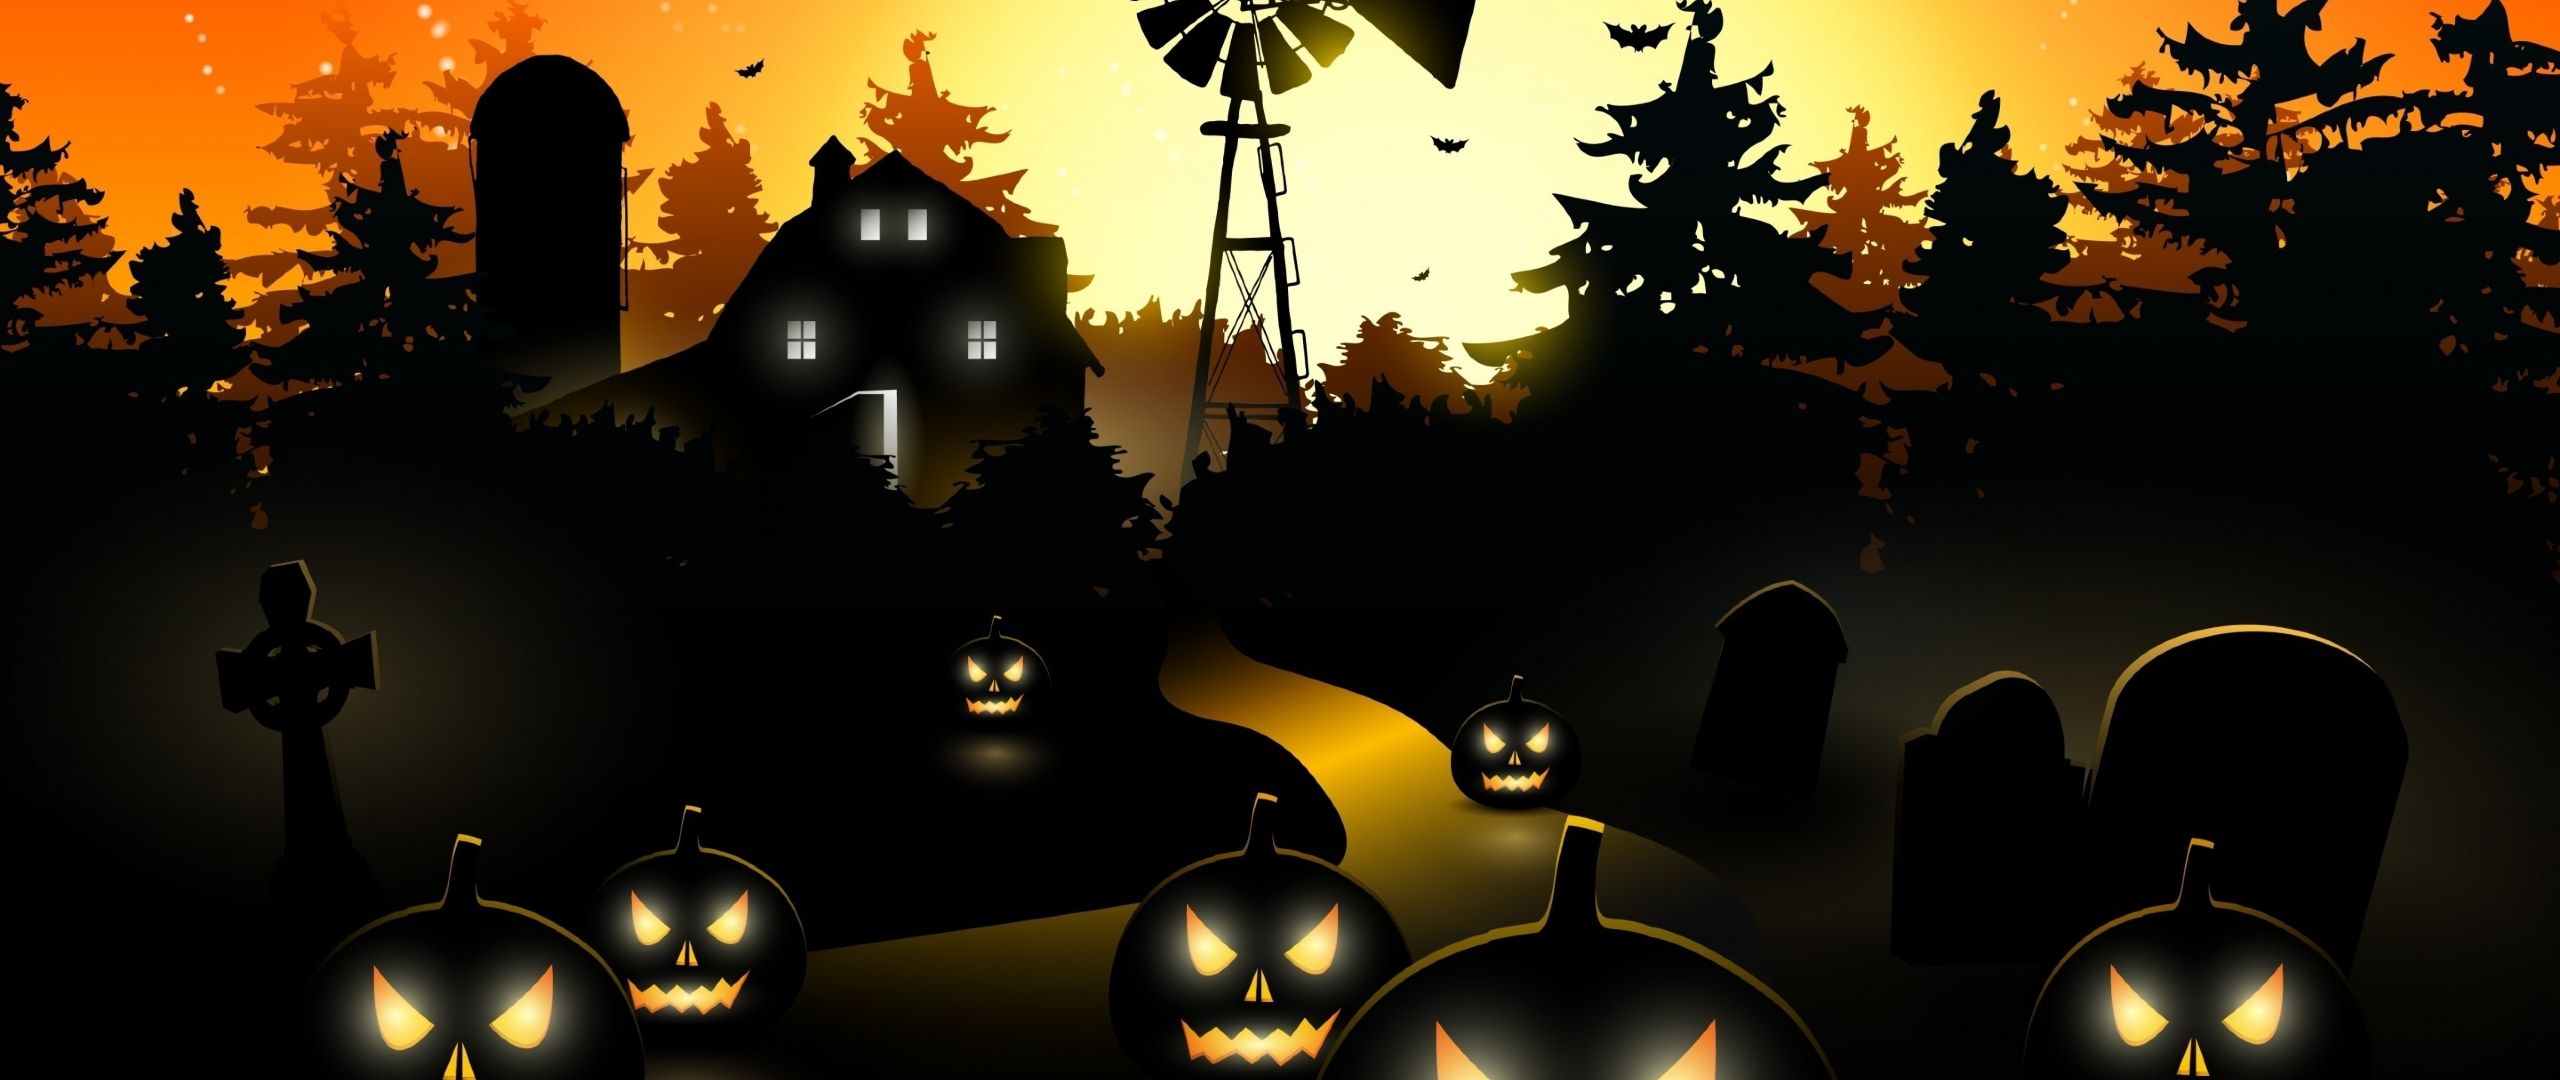 Halloween Haunted House 2560x1080 Resolution Wallpaper, HD Holidays 4K Wallpaper, Image, Photo and Background